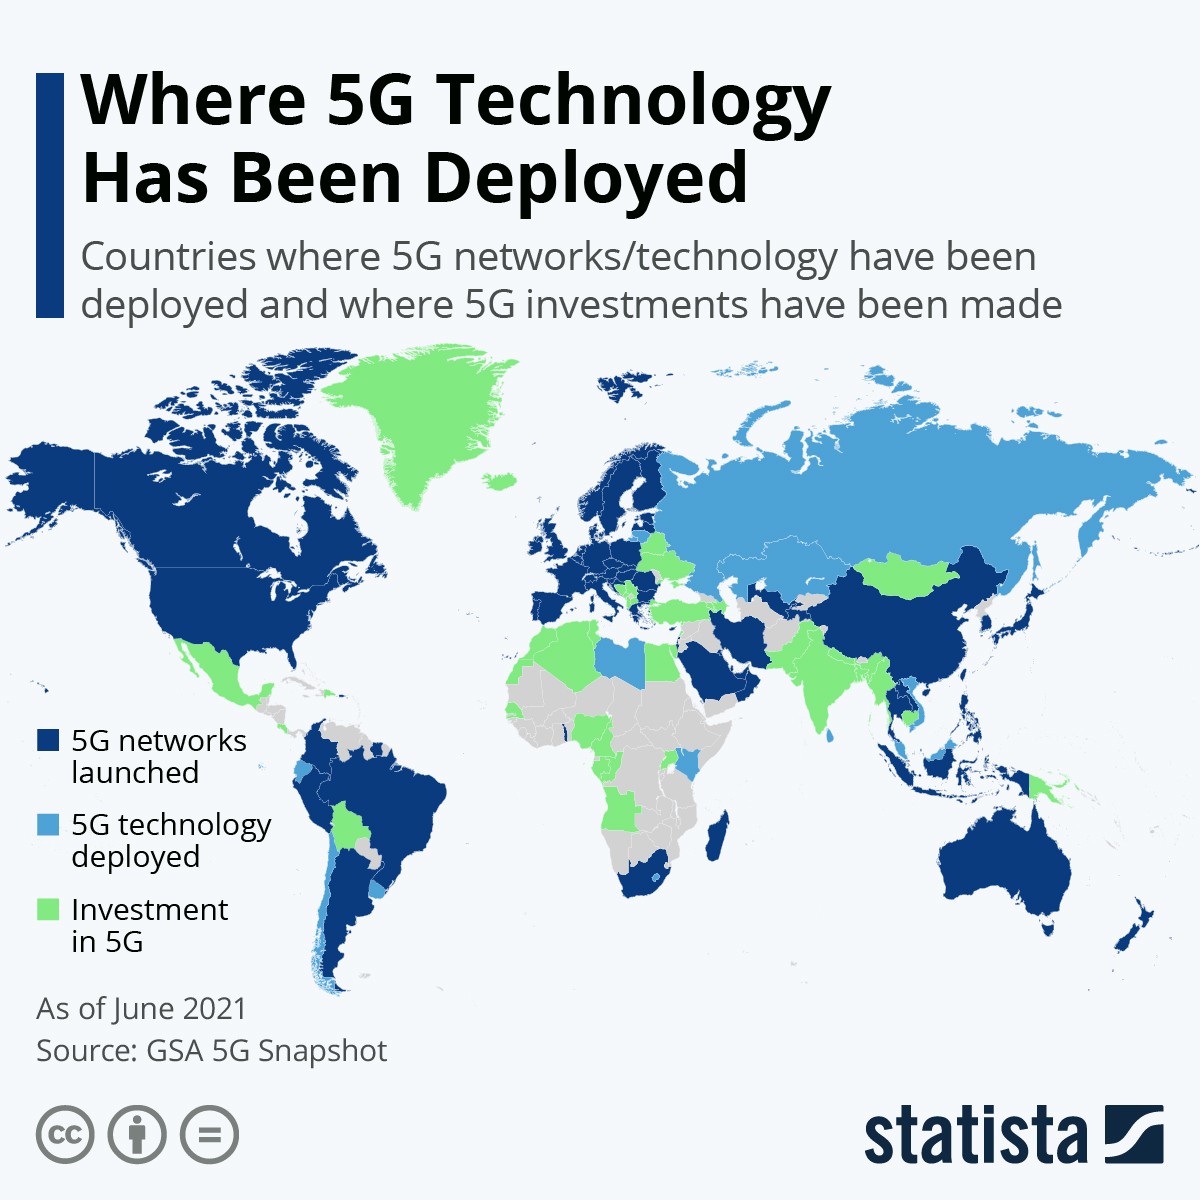 Global 5G coverage from mid-2021